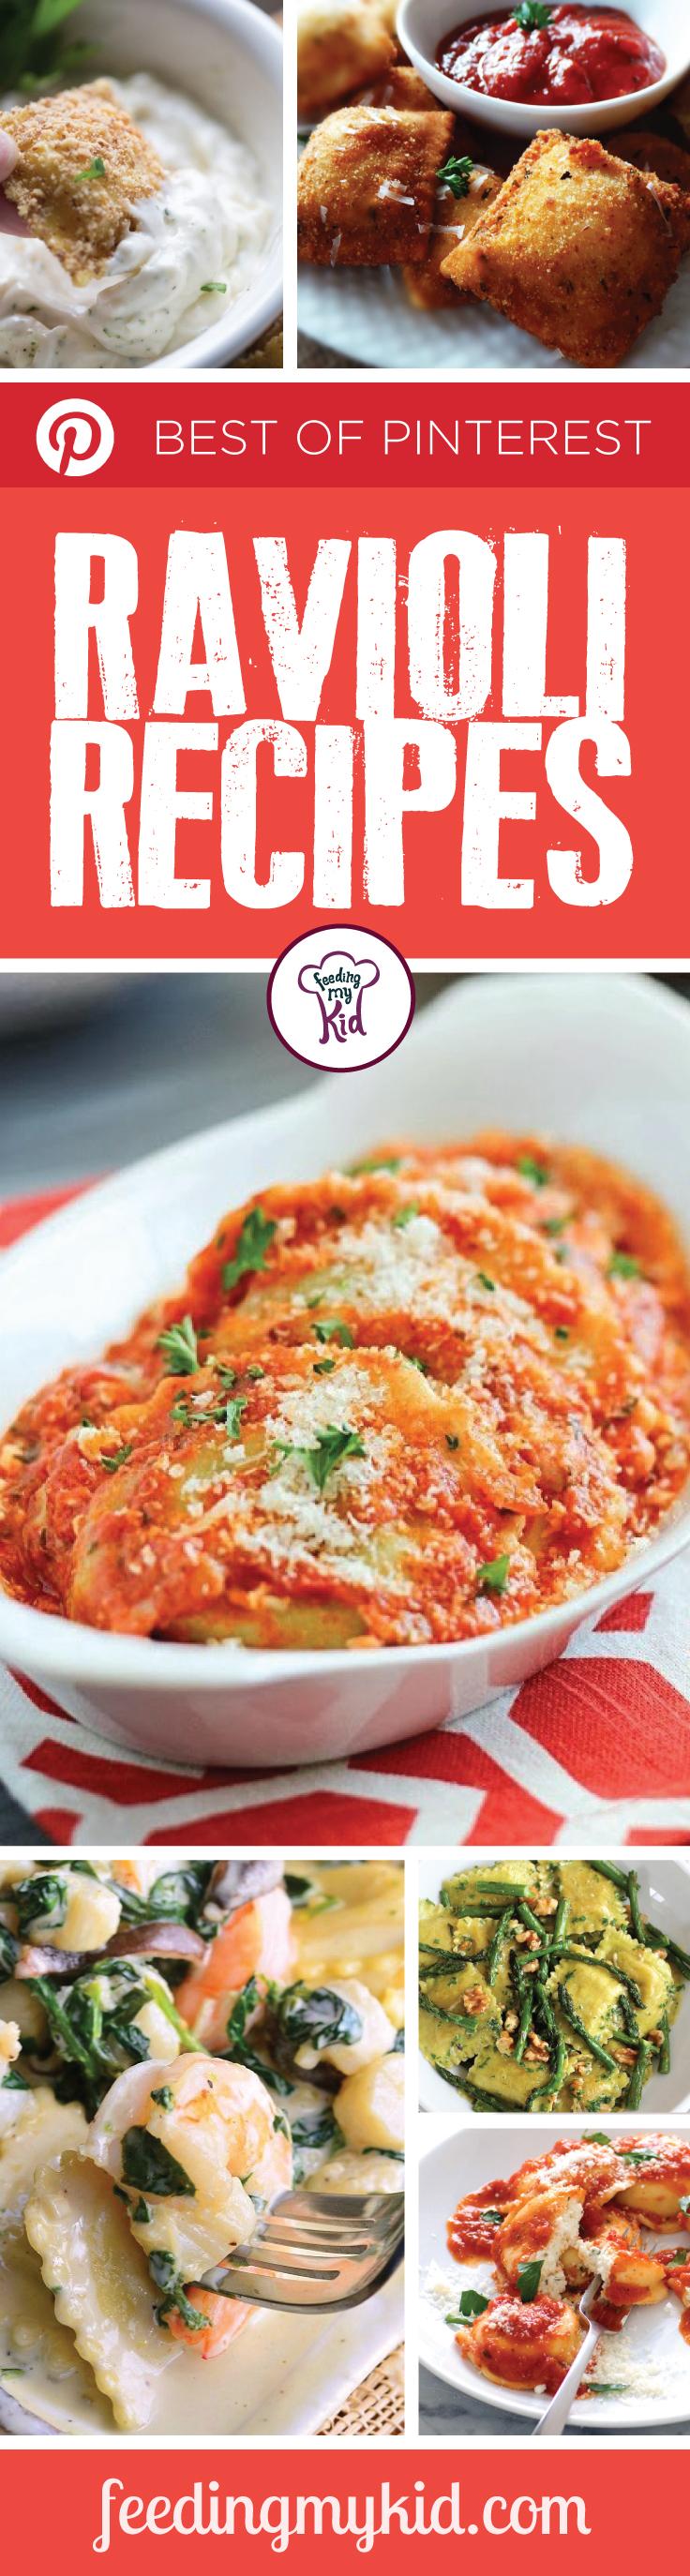 The Best of Pinterest Ravioli Recipes - Sometimes it's nice to change things up a bit when it comes to dinnertime meals. Here you'll find the Perfect ravioli recipe that the whole family will enjoy. From homemade ricotta and spinach filled ravioli to fried ravioli with spicy marinara. These recipes are delicious and ready to serve!